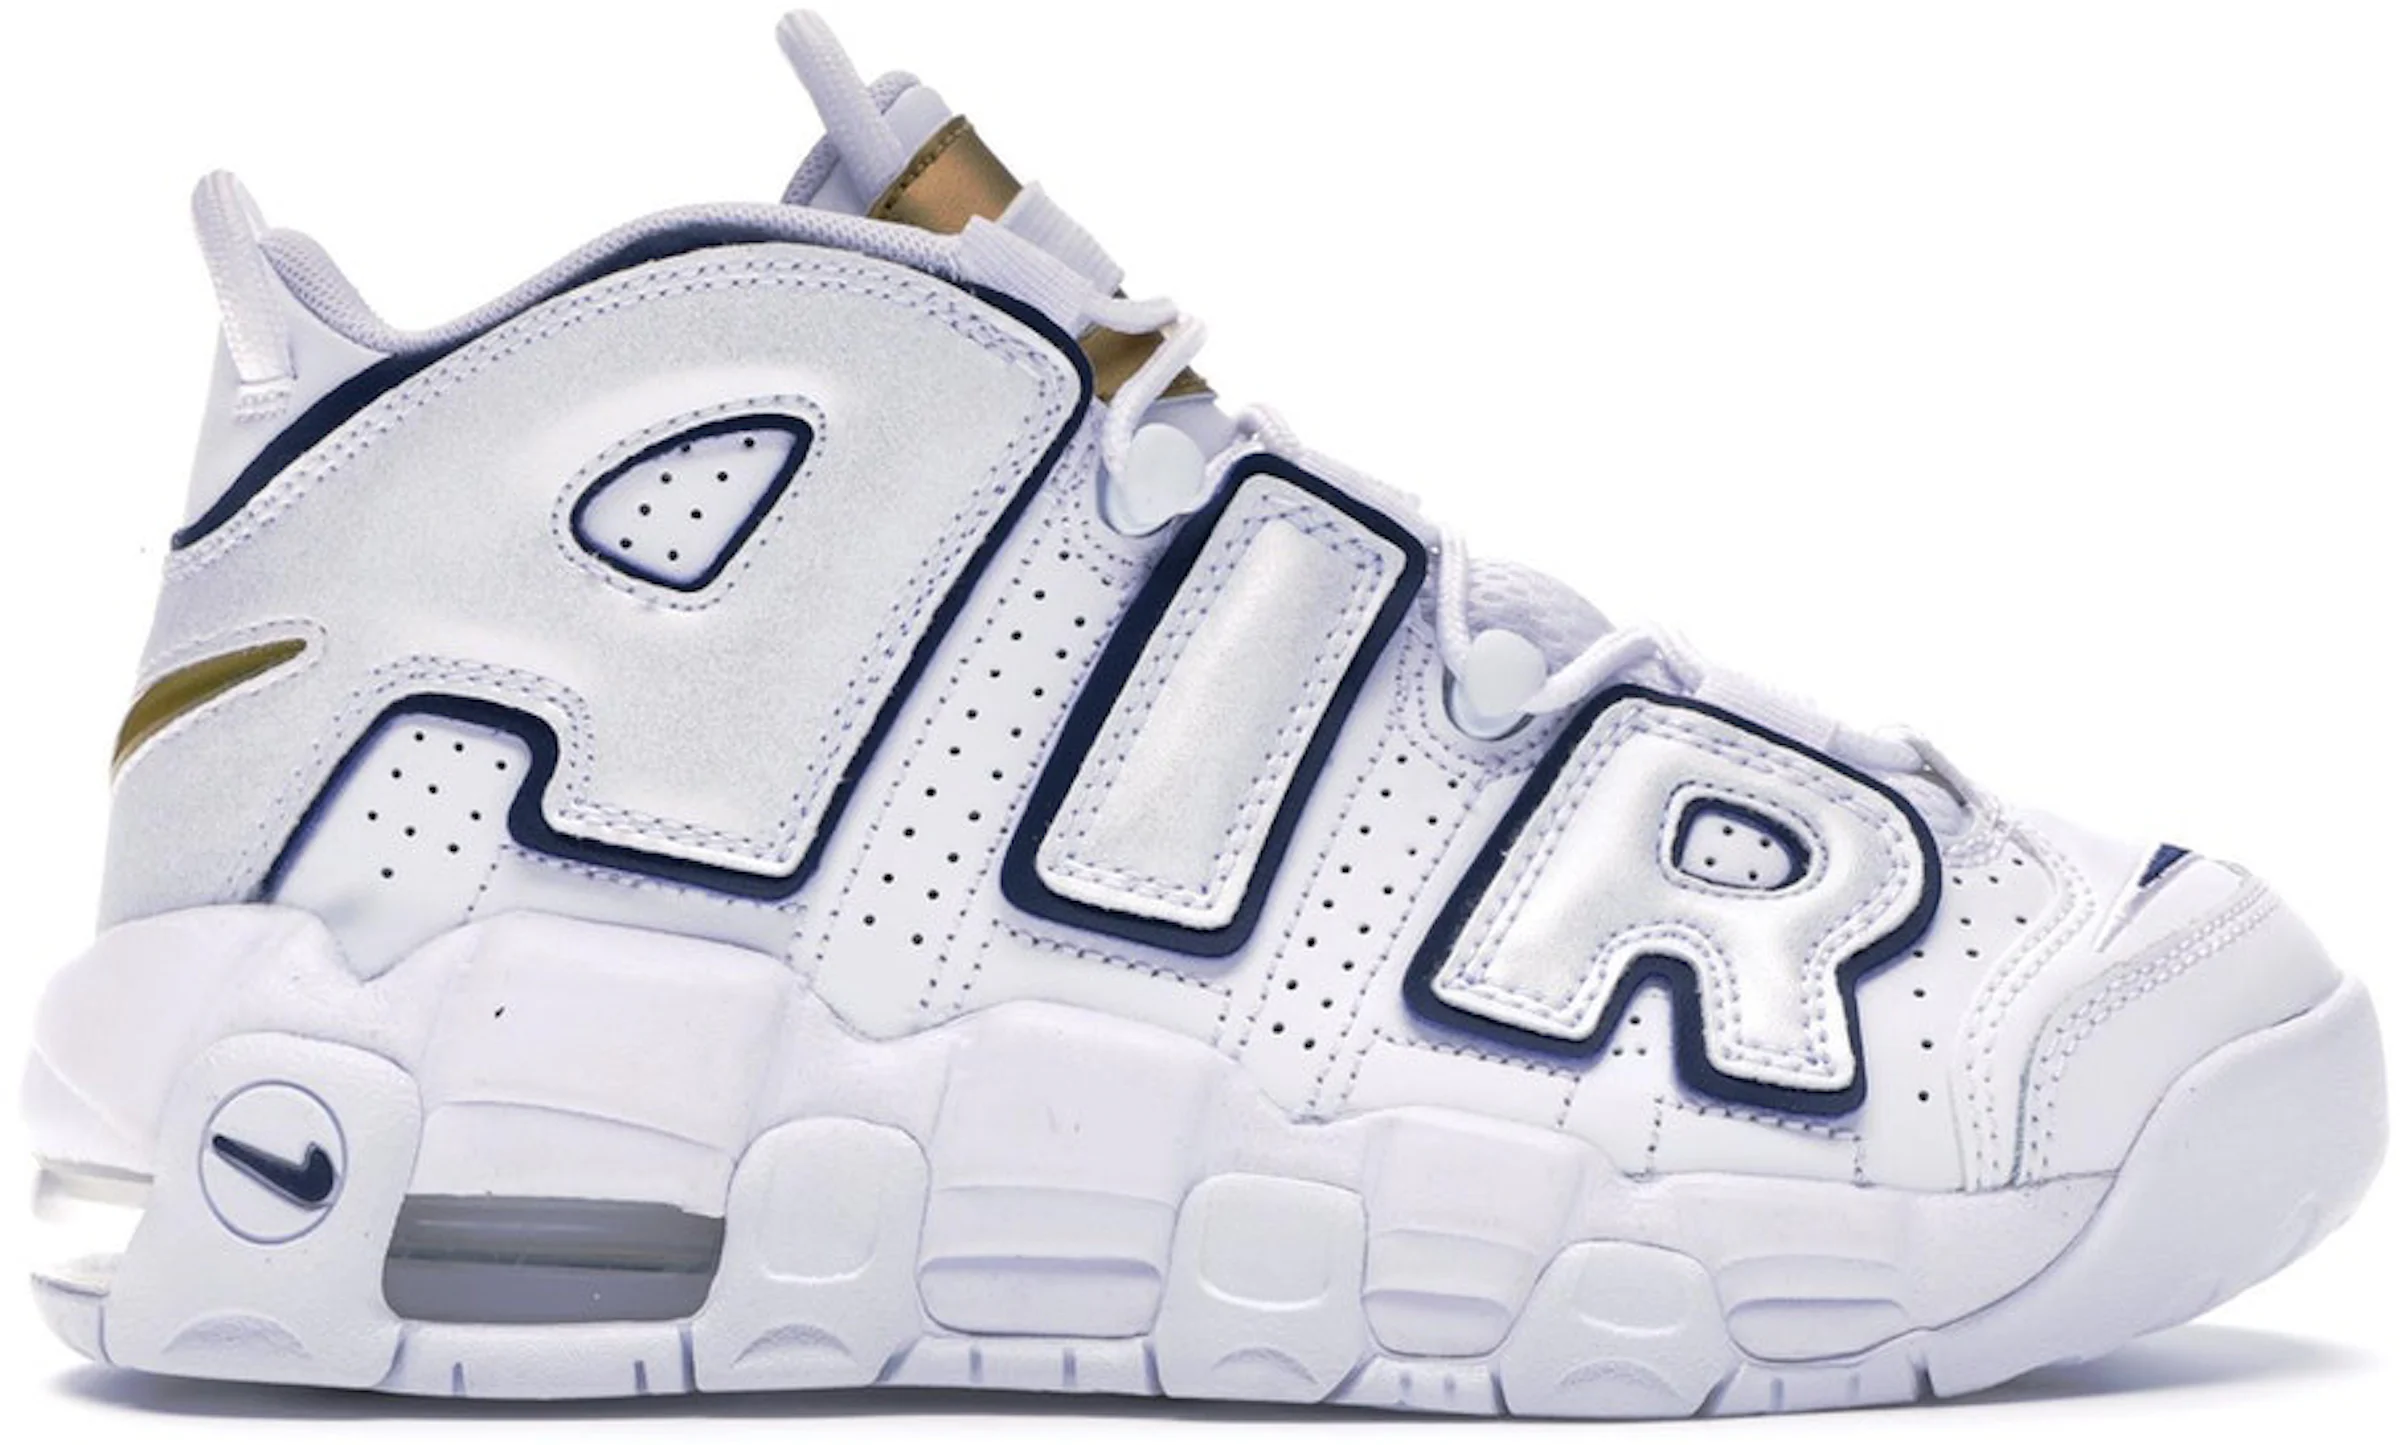 Nike Air More Uptempo White Midnight Navy (GS)